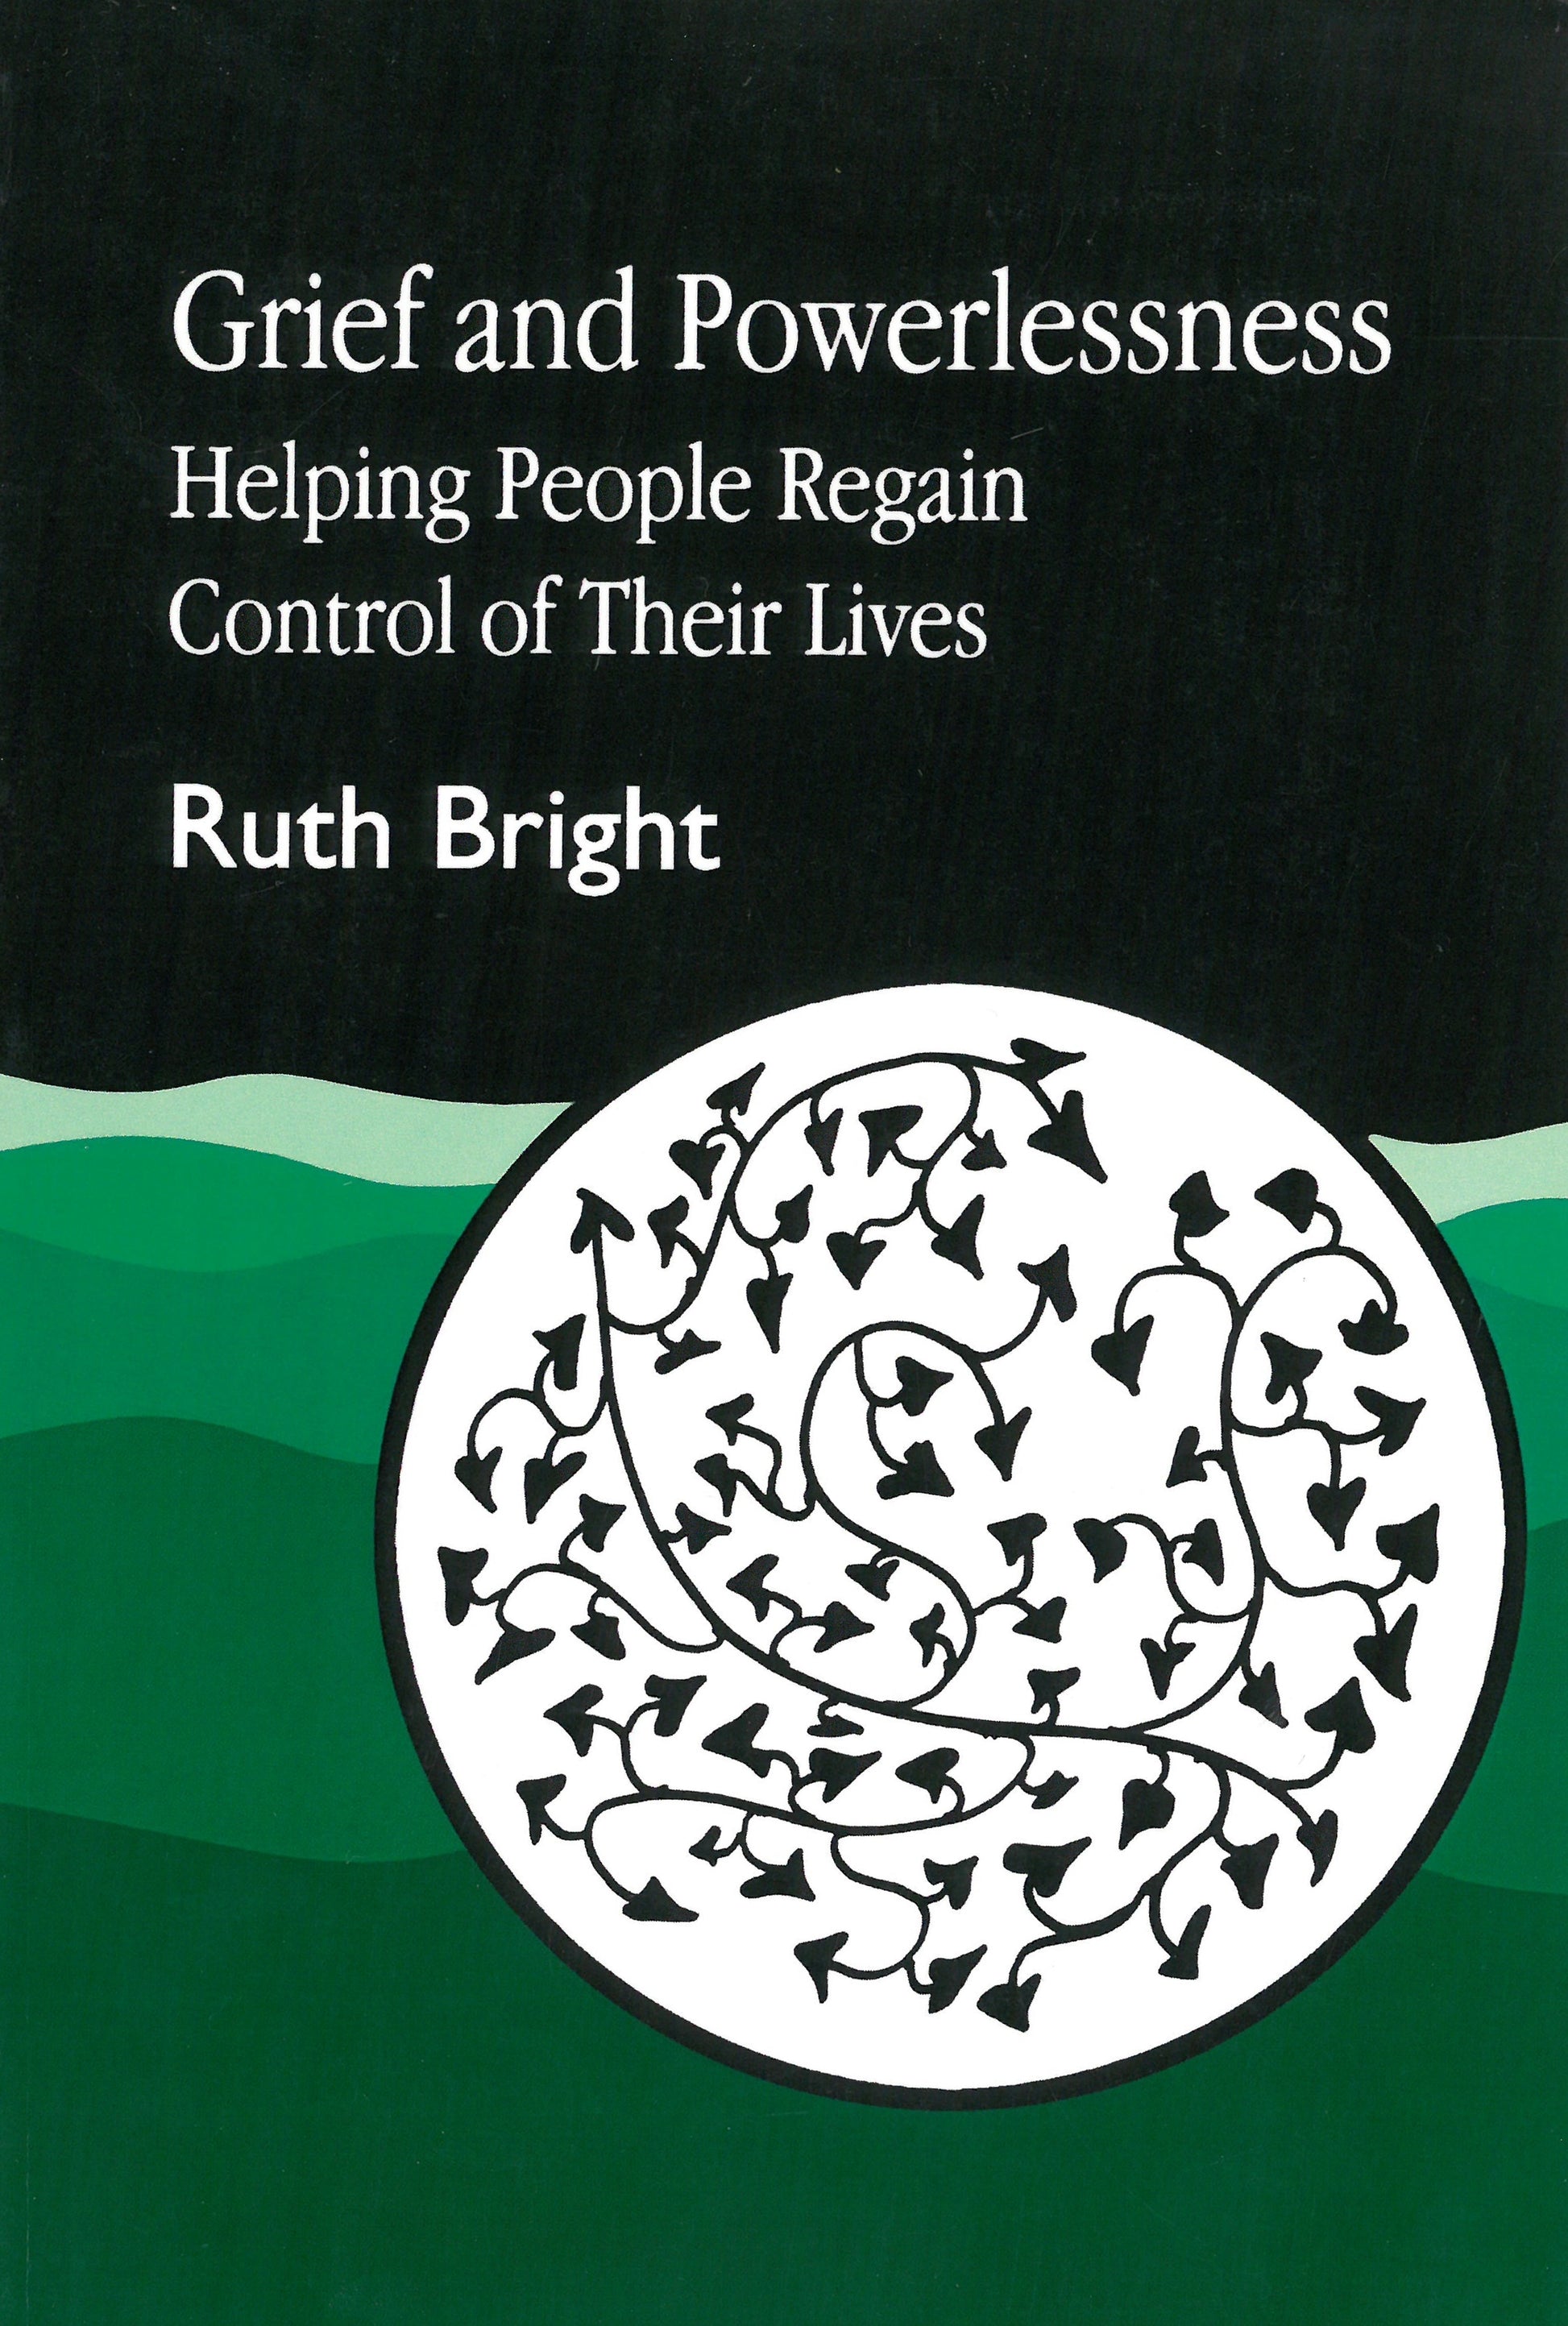 Grief and Powerlessness by Ruth Bright